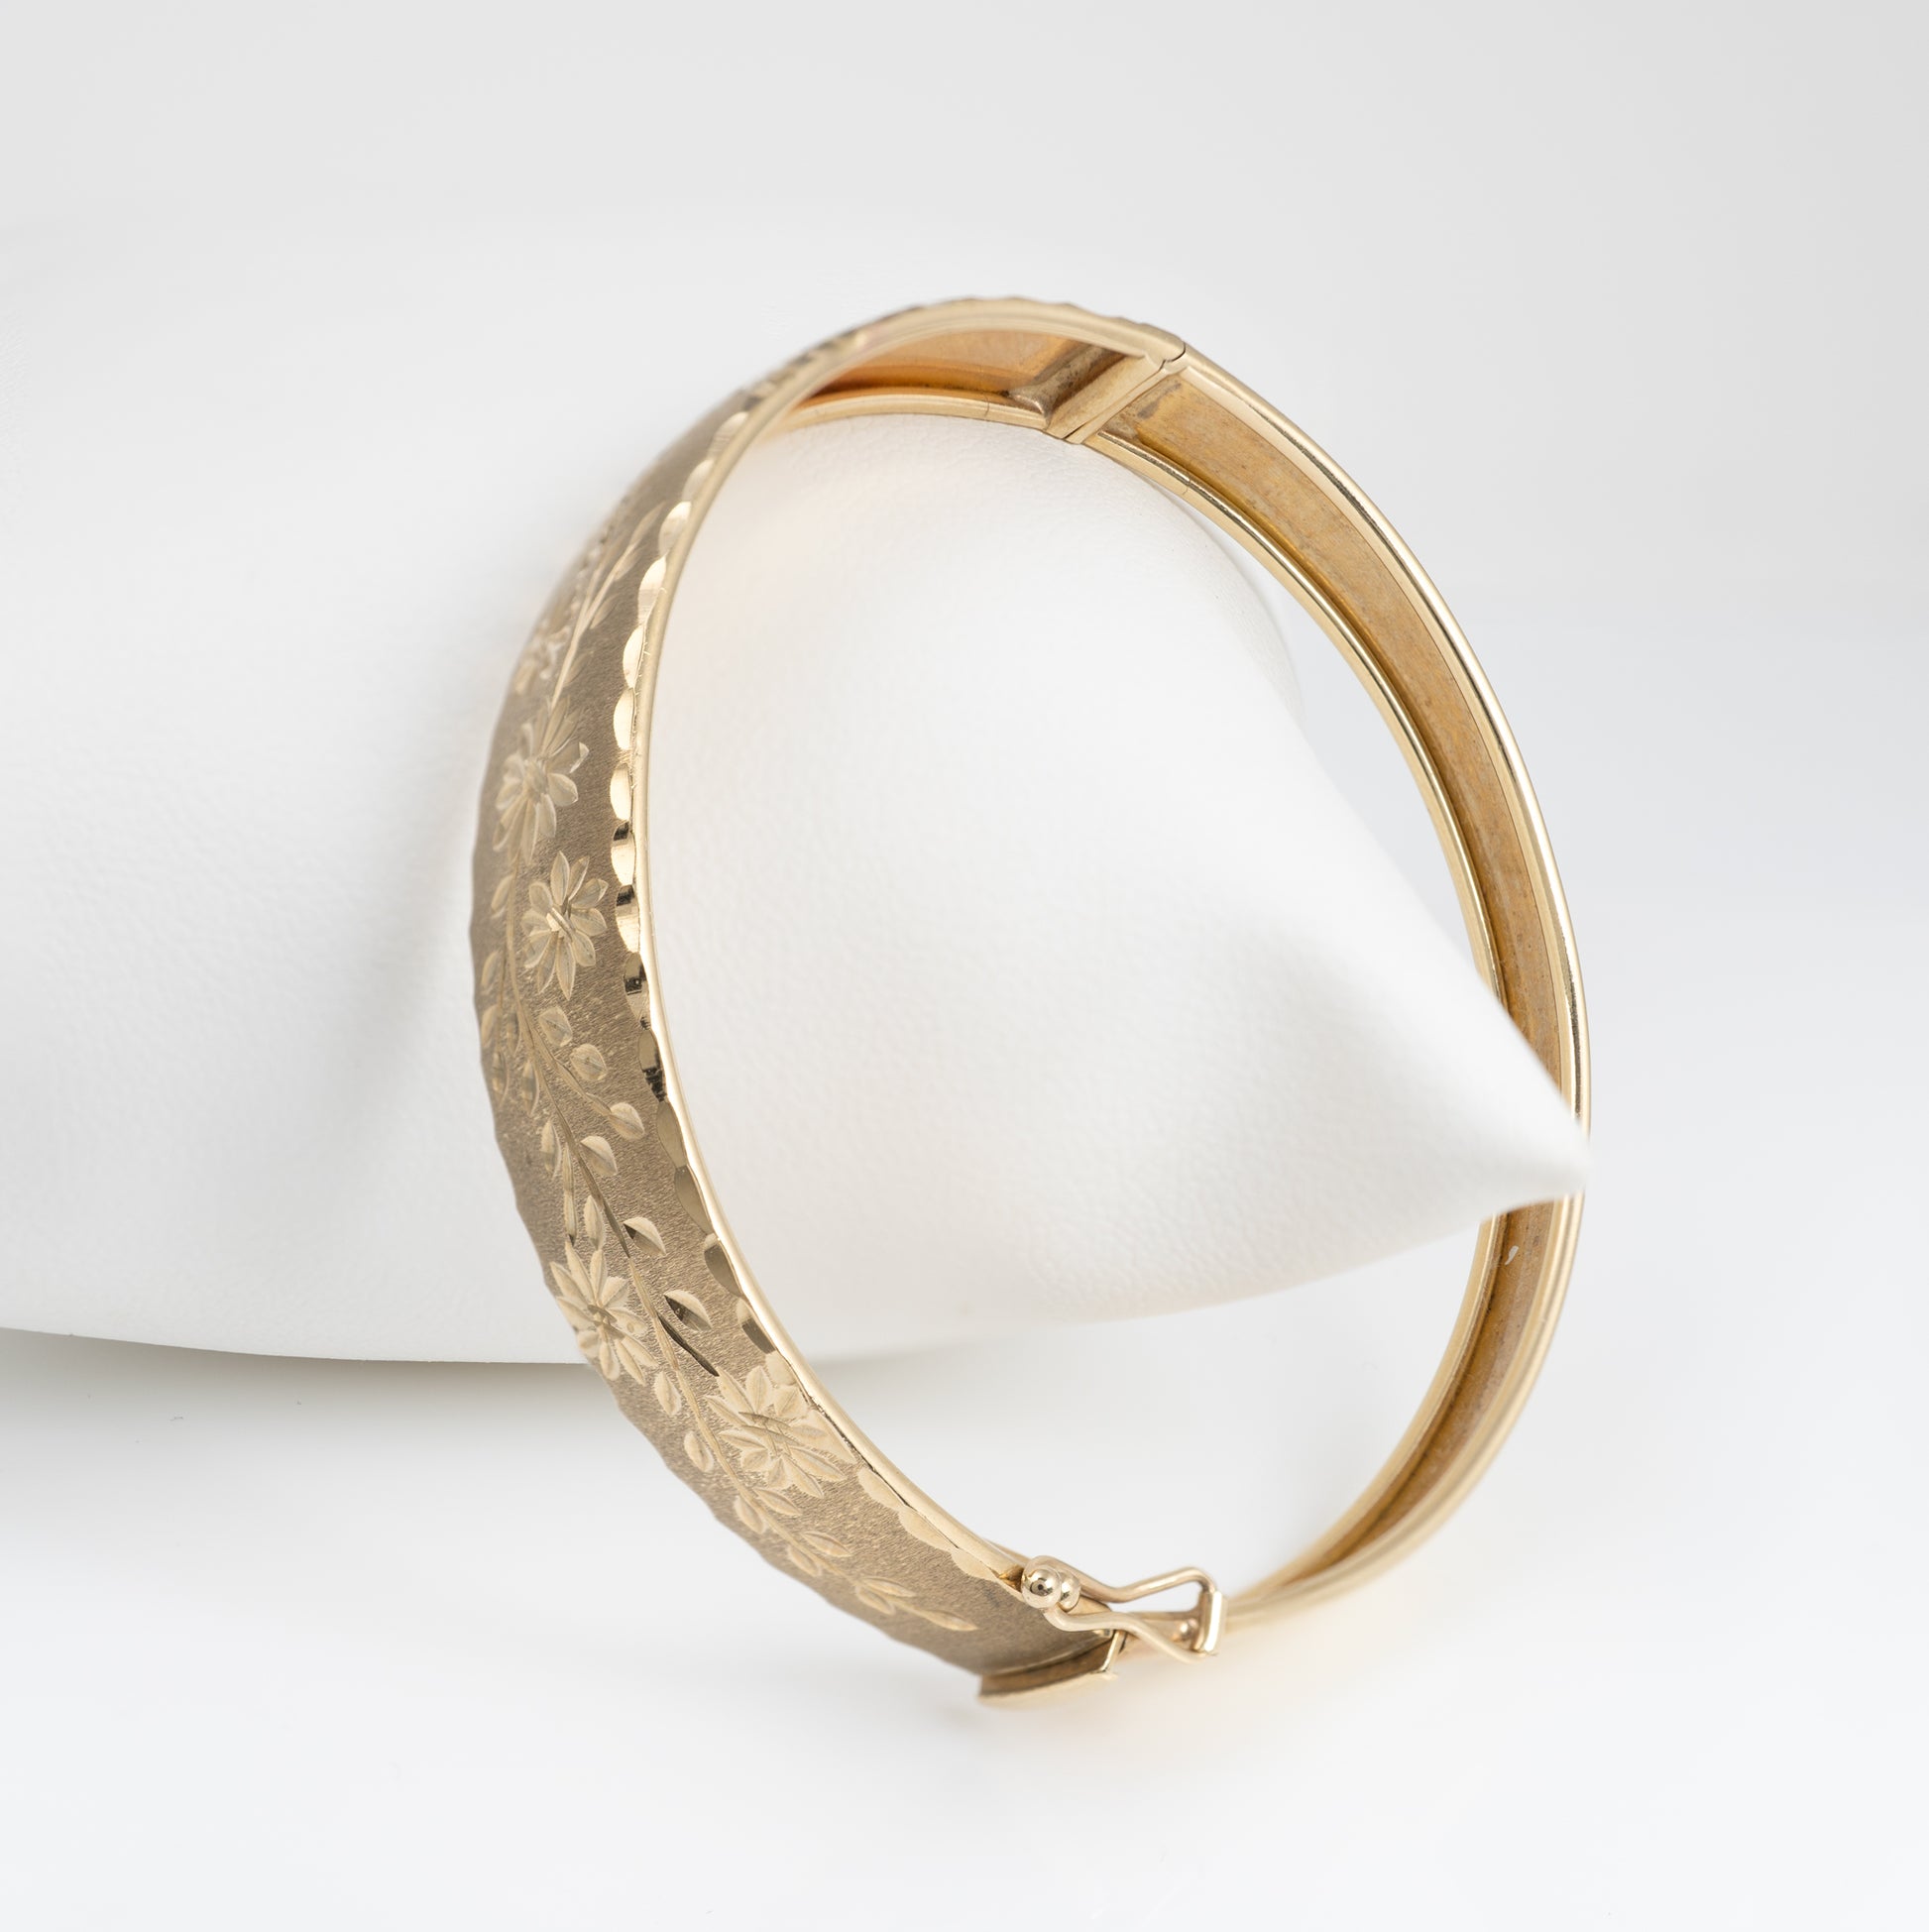 9ct Gold Bangle with Diamond Cut Flower and Leaf Patterns